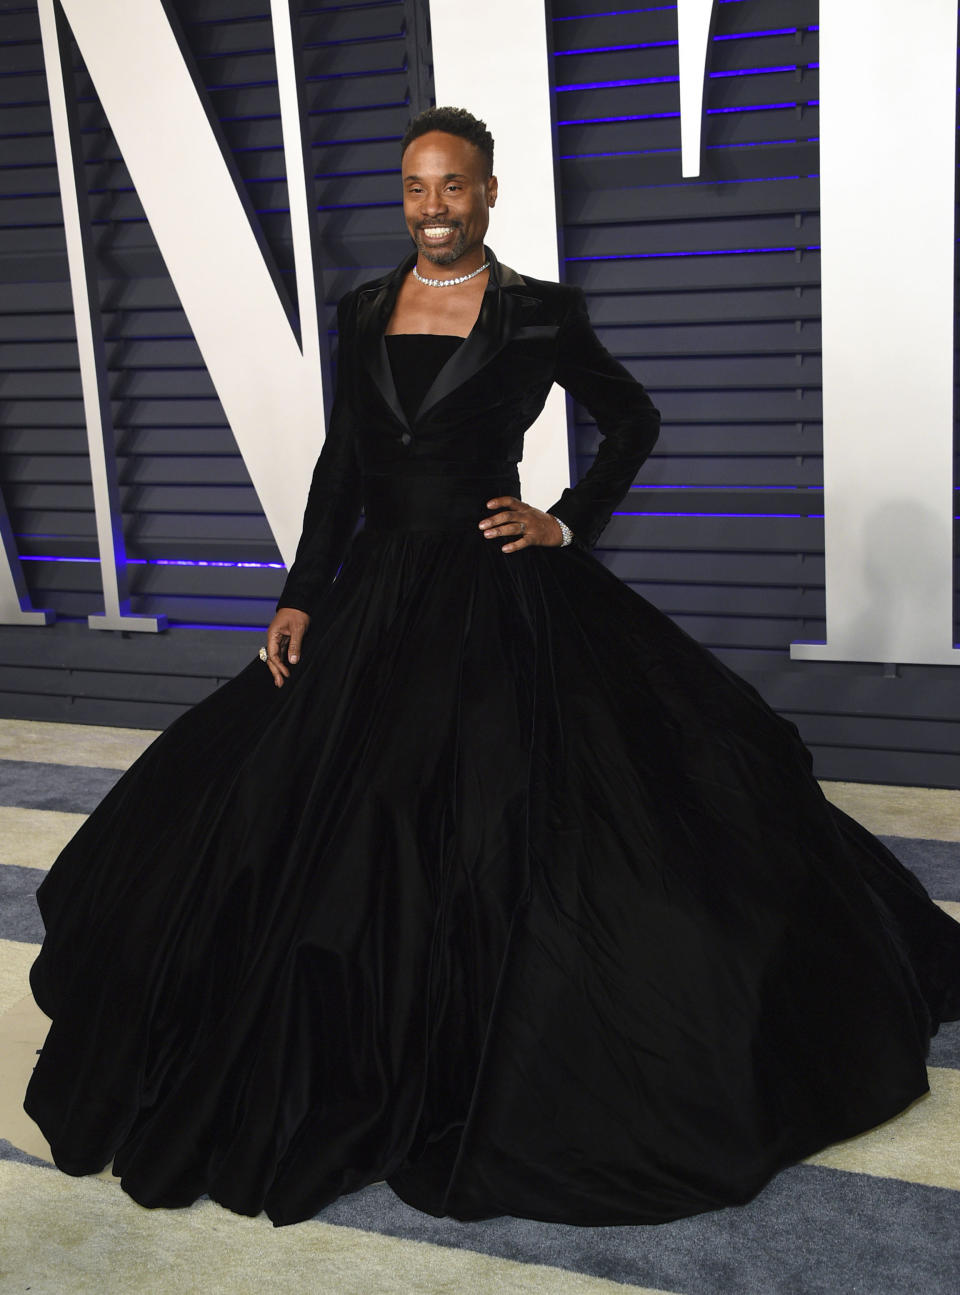 Billy Porter arrives at the Vanity Fair Oscar Party on Sunday, Feb. 24, 2019, in Beverly Hills, Calif. (Photo by Evan Agostini/Invision/AP)